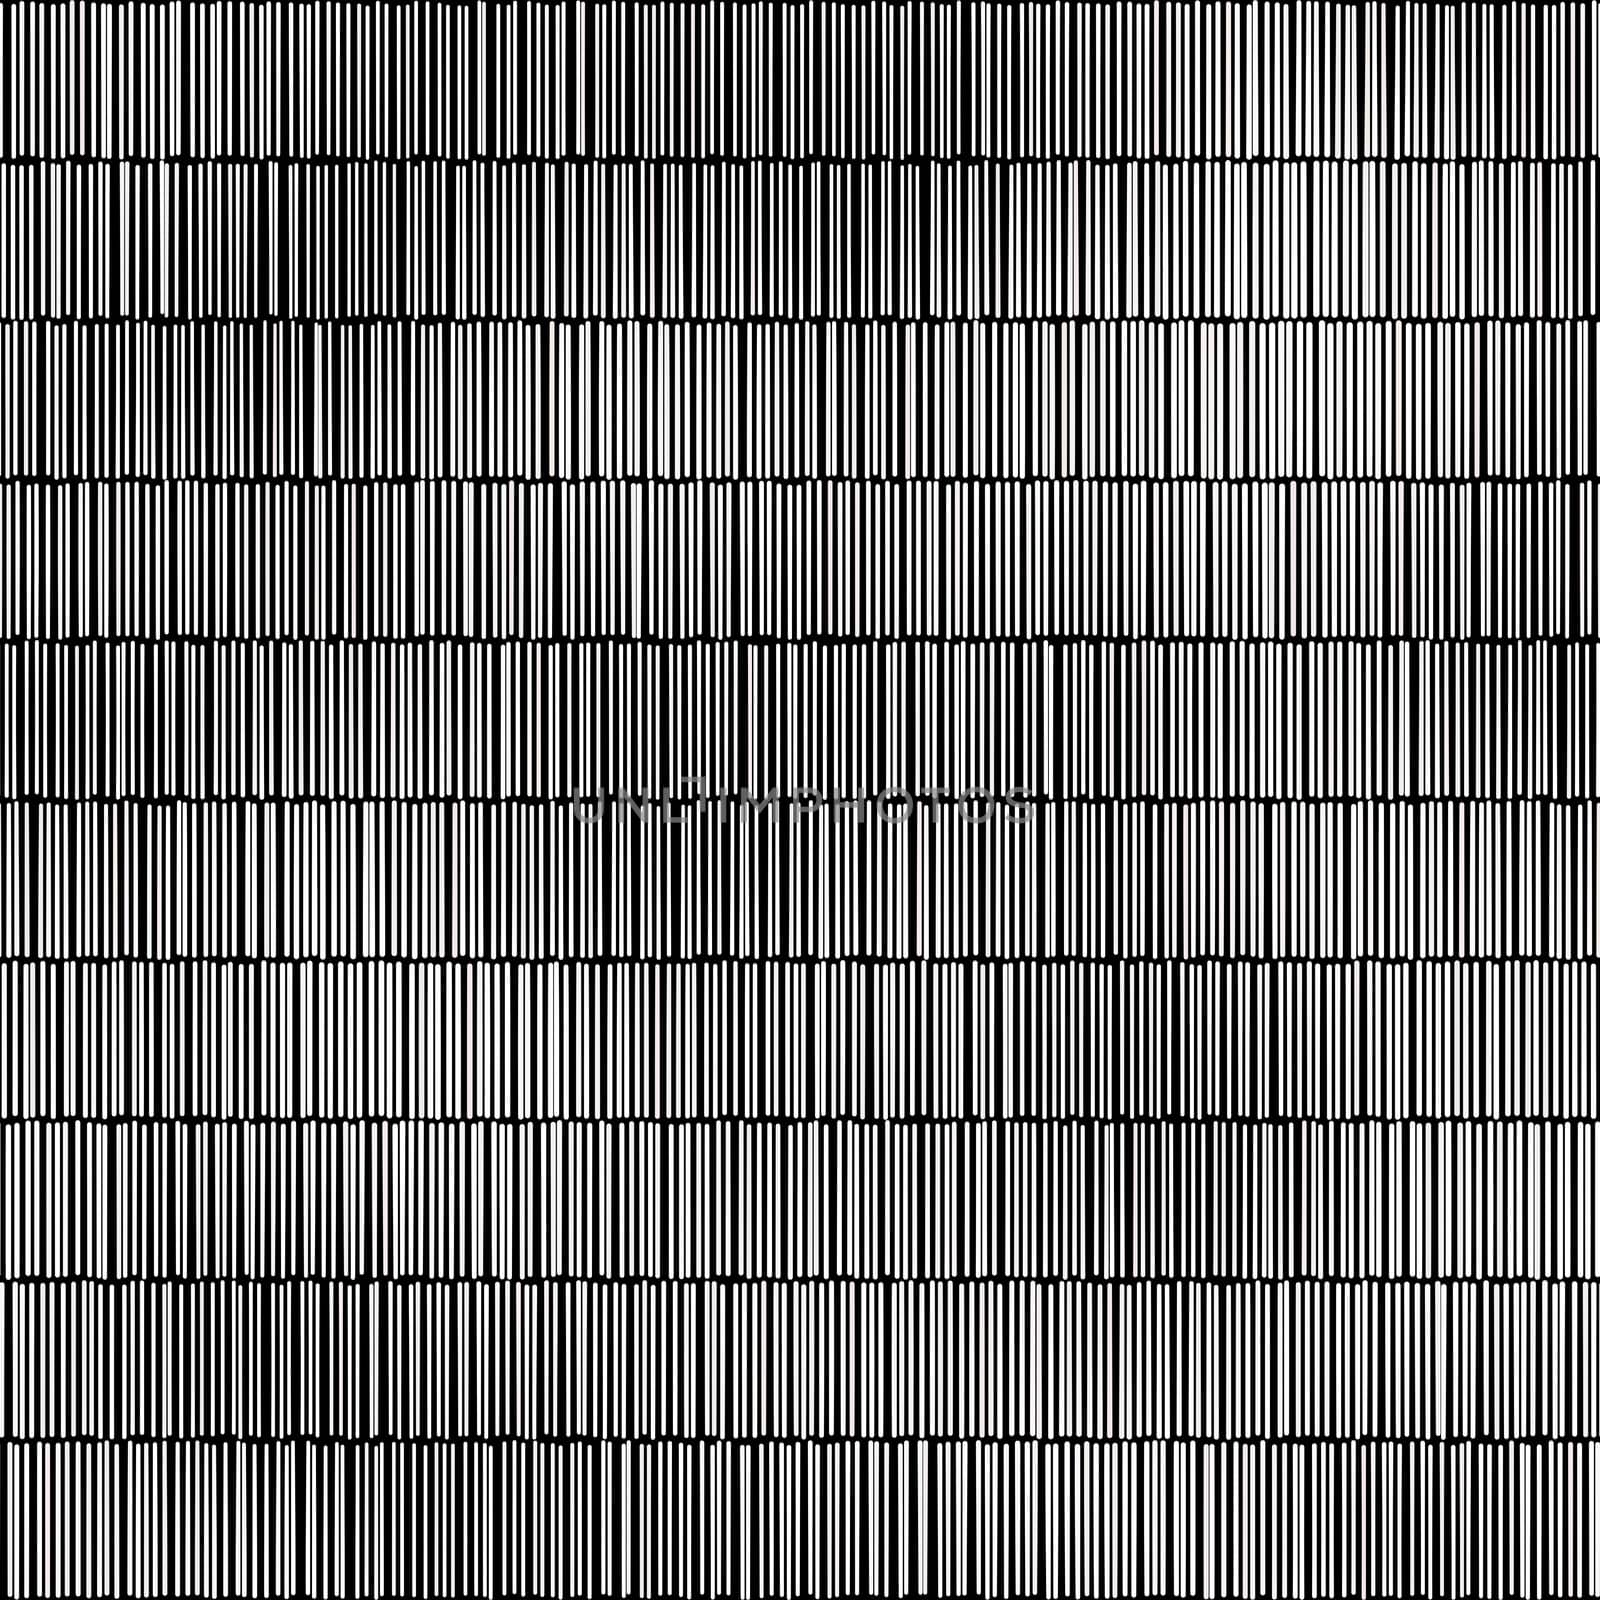 Illustration of an abstract black and white background texture